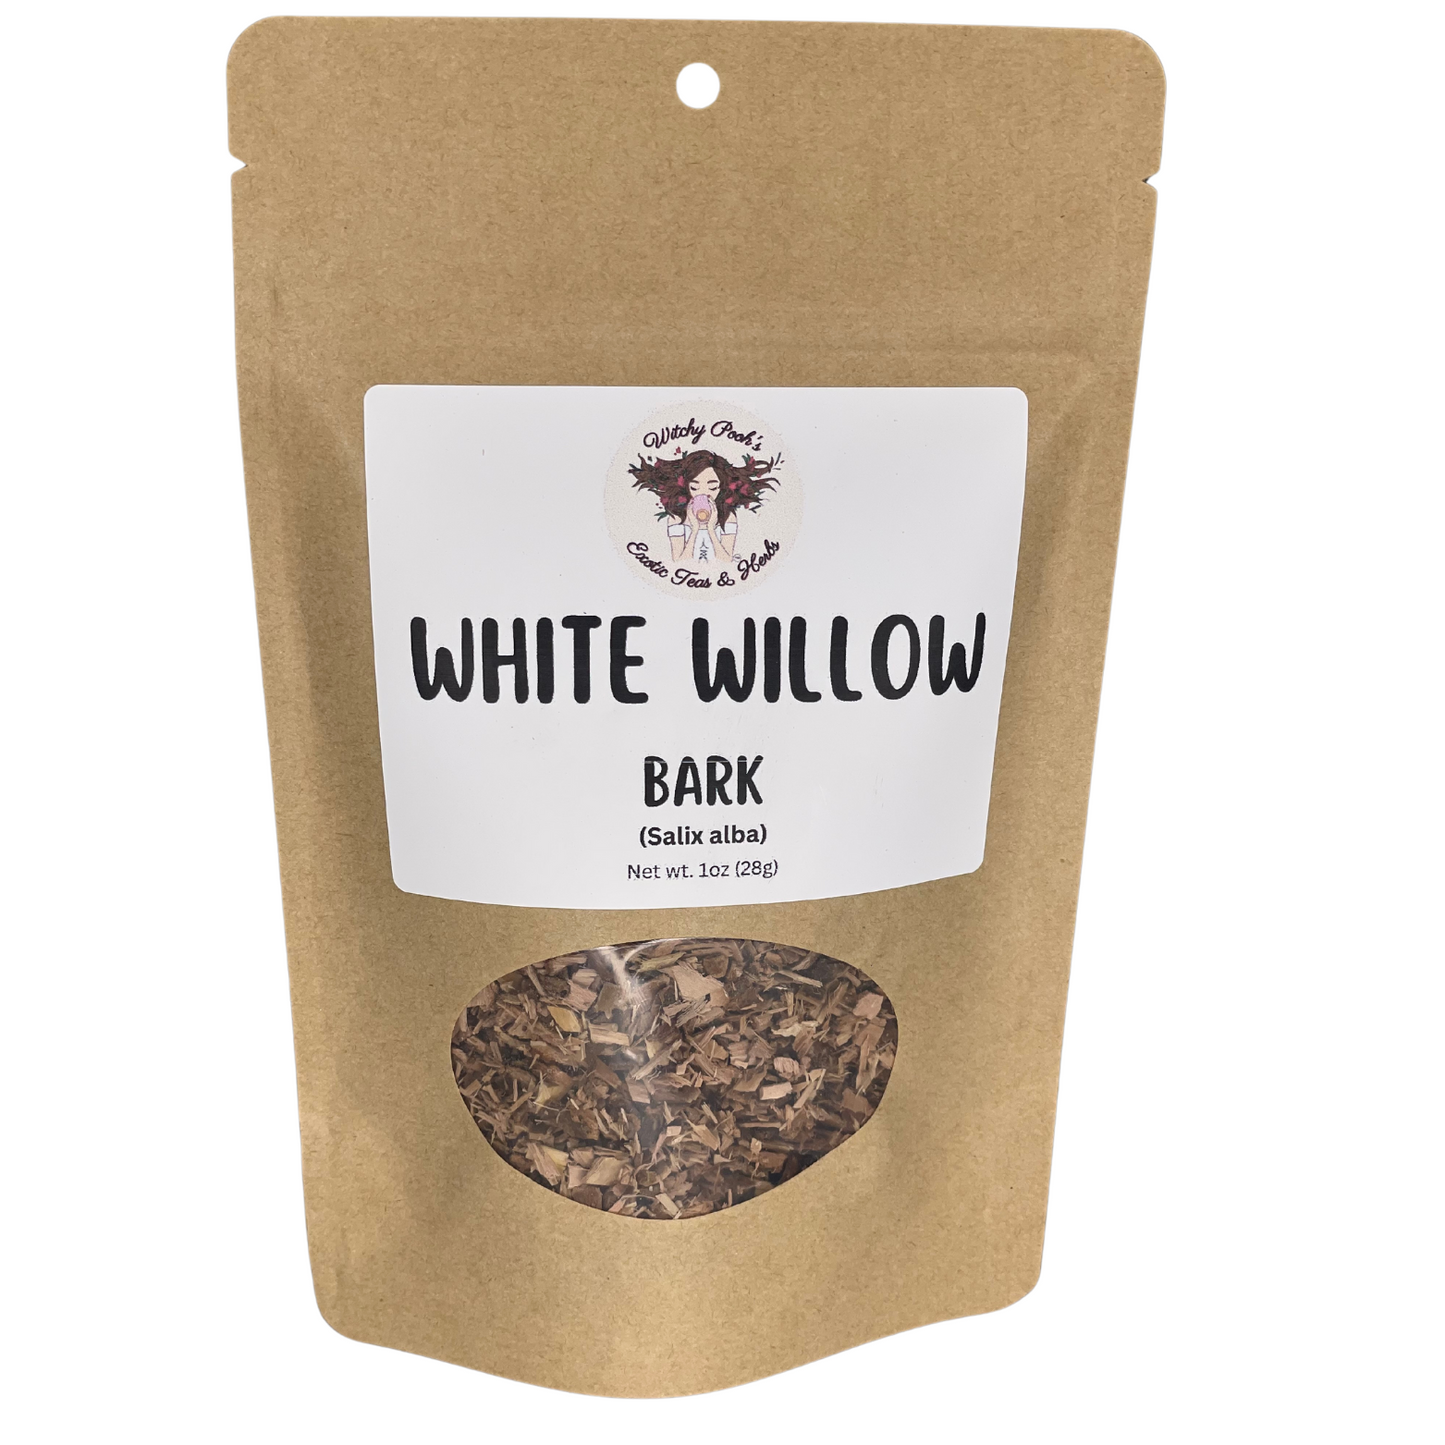 White Willow Bark The Best Pain Reliver and Anti-Inflammatory